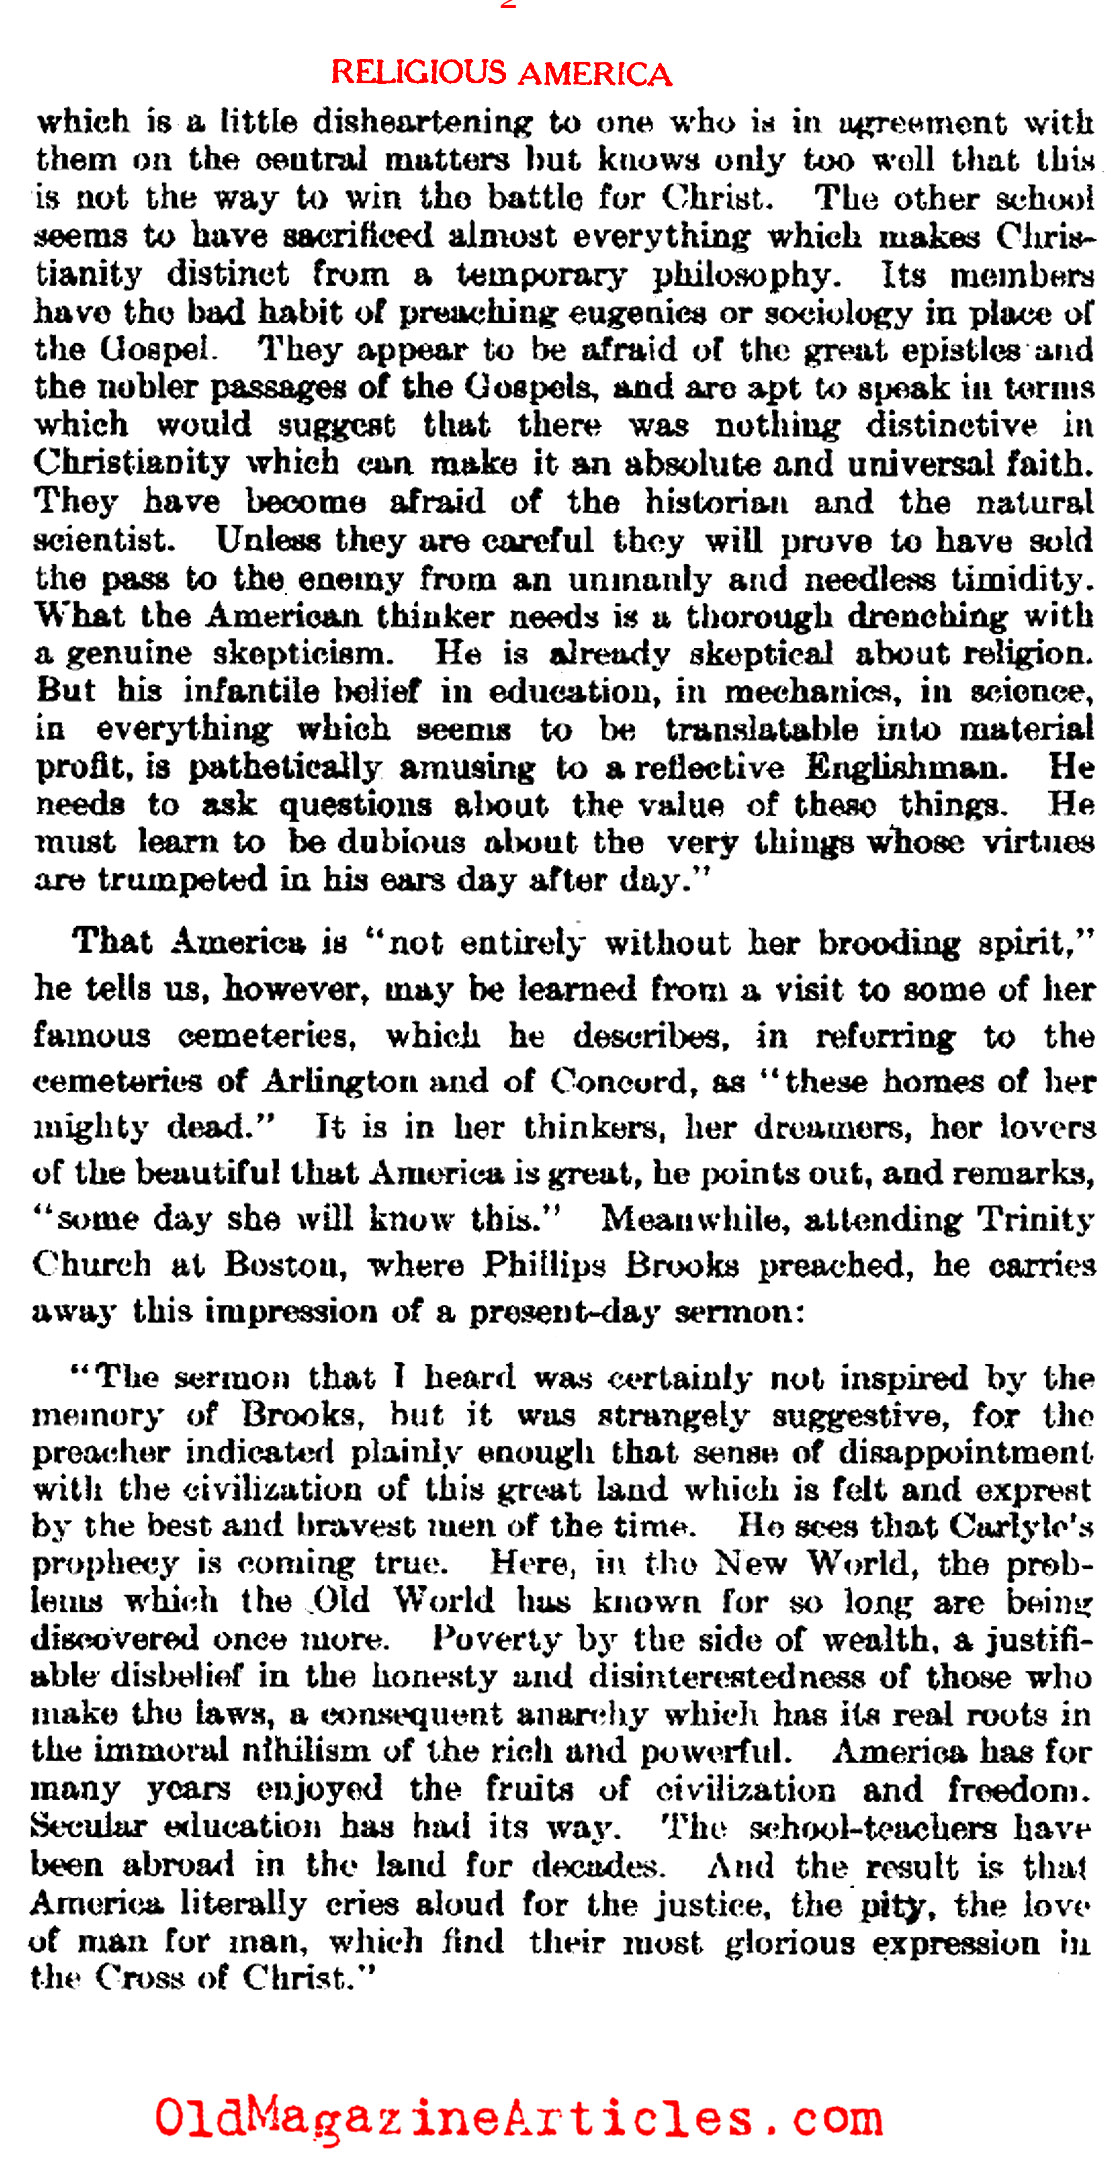 The British View of Religious America (Literary Digest, 1913)